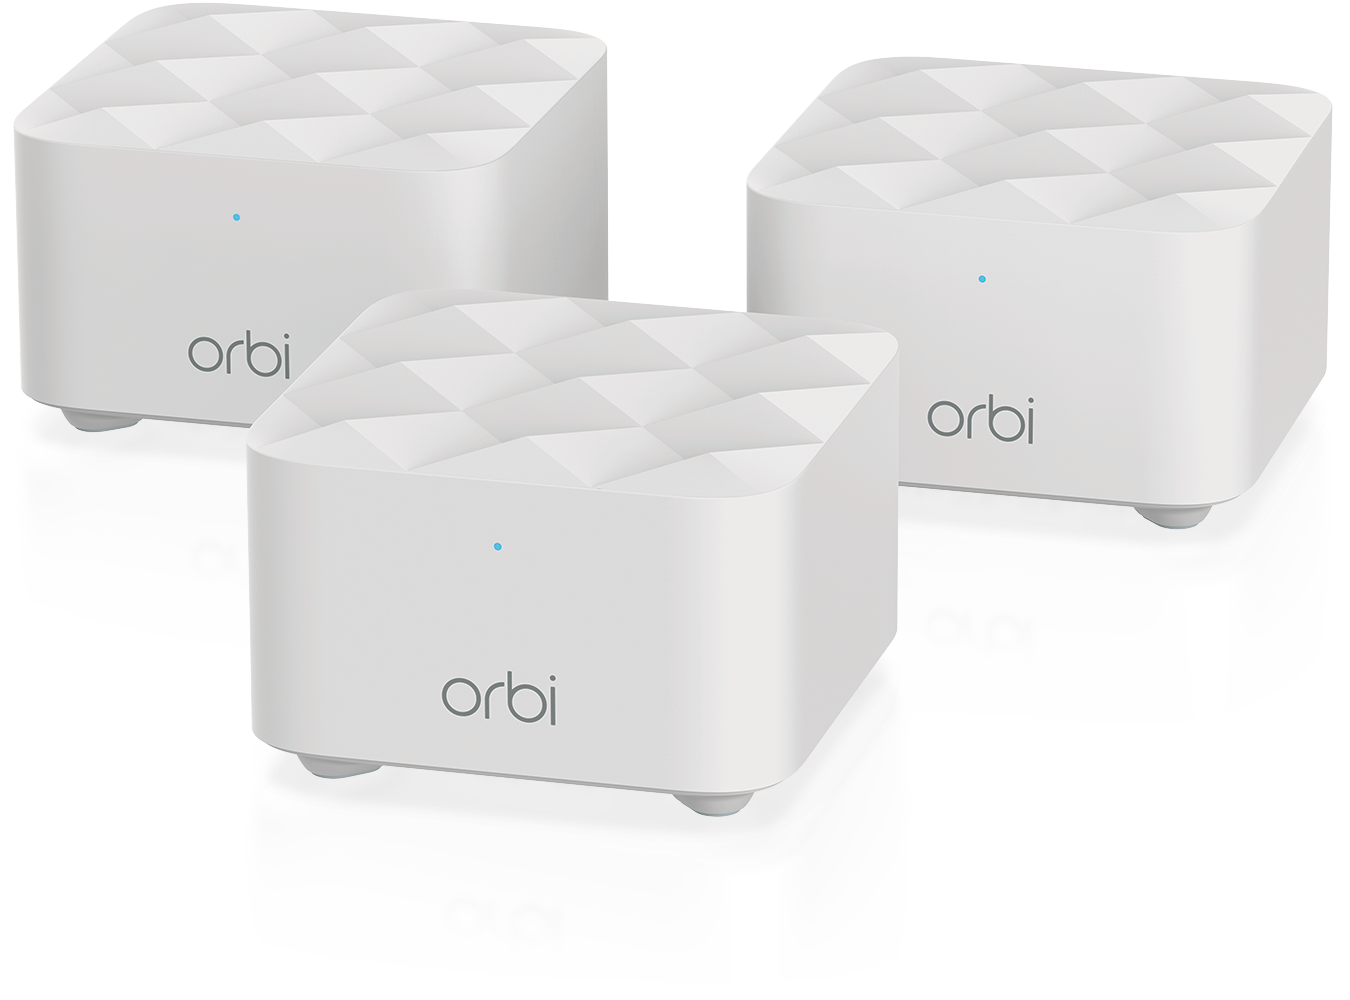 NETGEAR RBK13 Orbi Mesh WiFi System with 1.2Gbps Dual-band WiFi, Up to 4,500 sq. ft. – 3 Pack